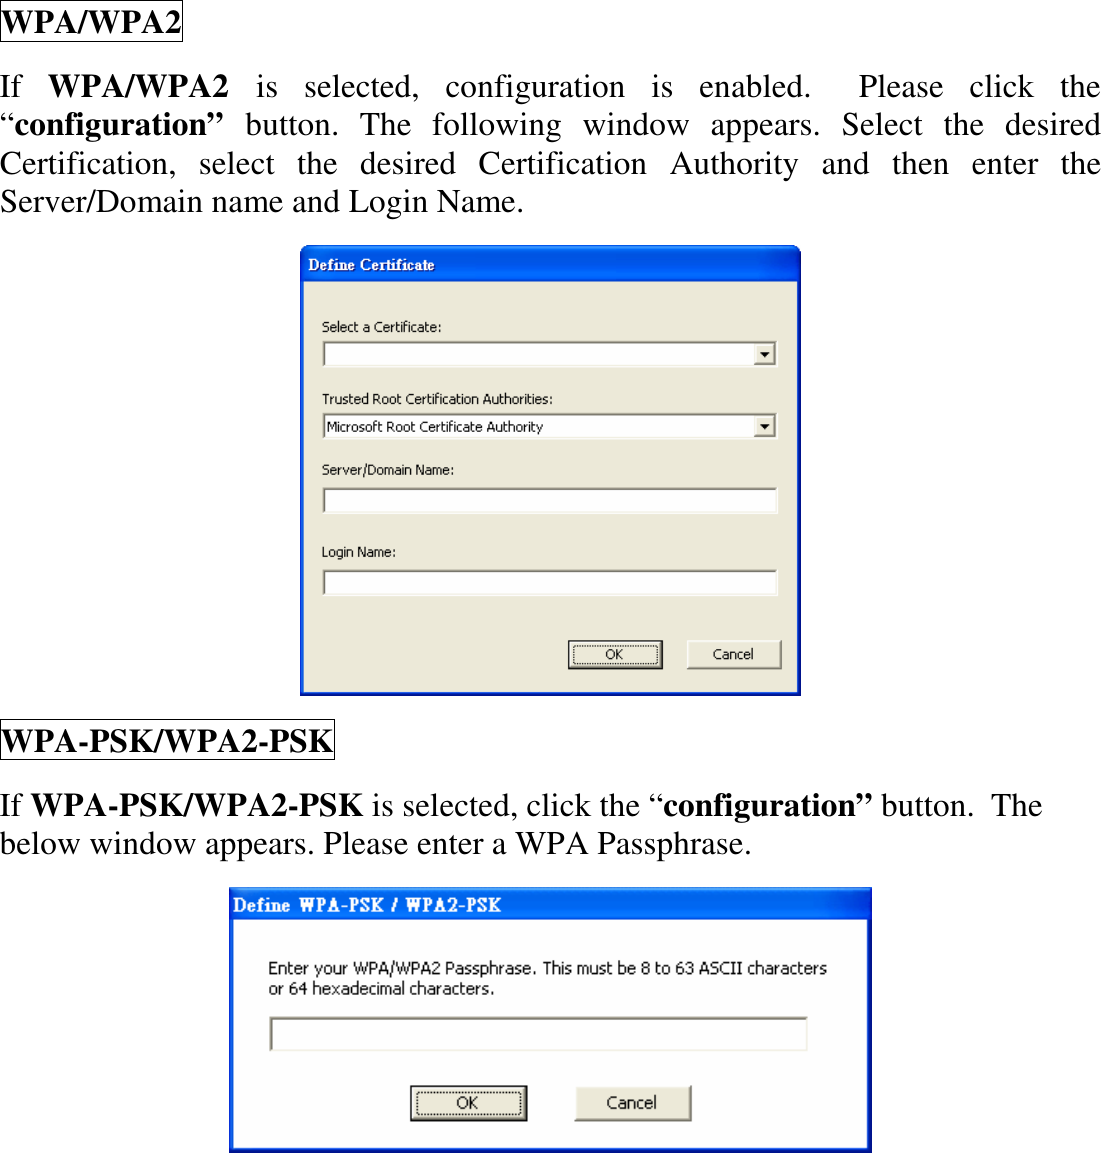  WPA/WPA2 If  WPA/WPA2  is  selected,  configuration  is  enabled.   Please  click  the “configuration”  button.  The  following  window  appears.  Select  the  desired Certification,  select  the  desired  Certification  Authority  and  then  enter  the Server/Domain name and Login Name.  WPA-PSK/WPA2-PSK If WPA-PSK/WPA2-PSK is selected, click the “configuration” button.  The below window appears. Please enter a WPA Passphrase.   